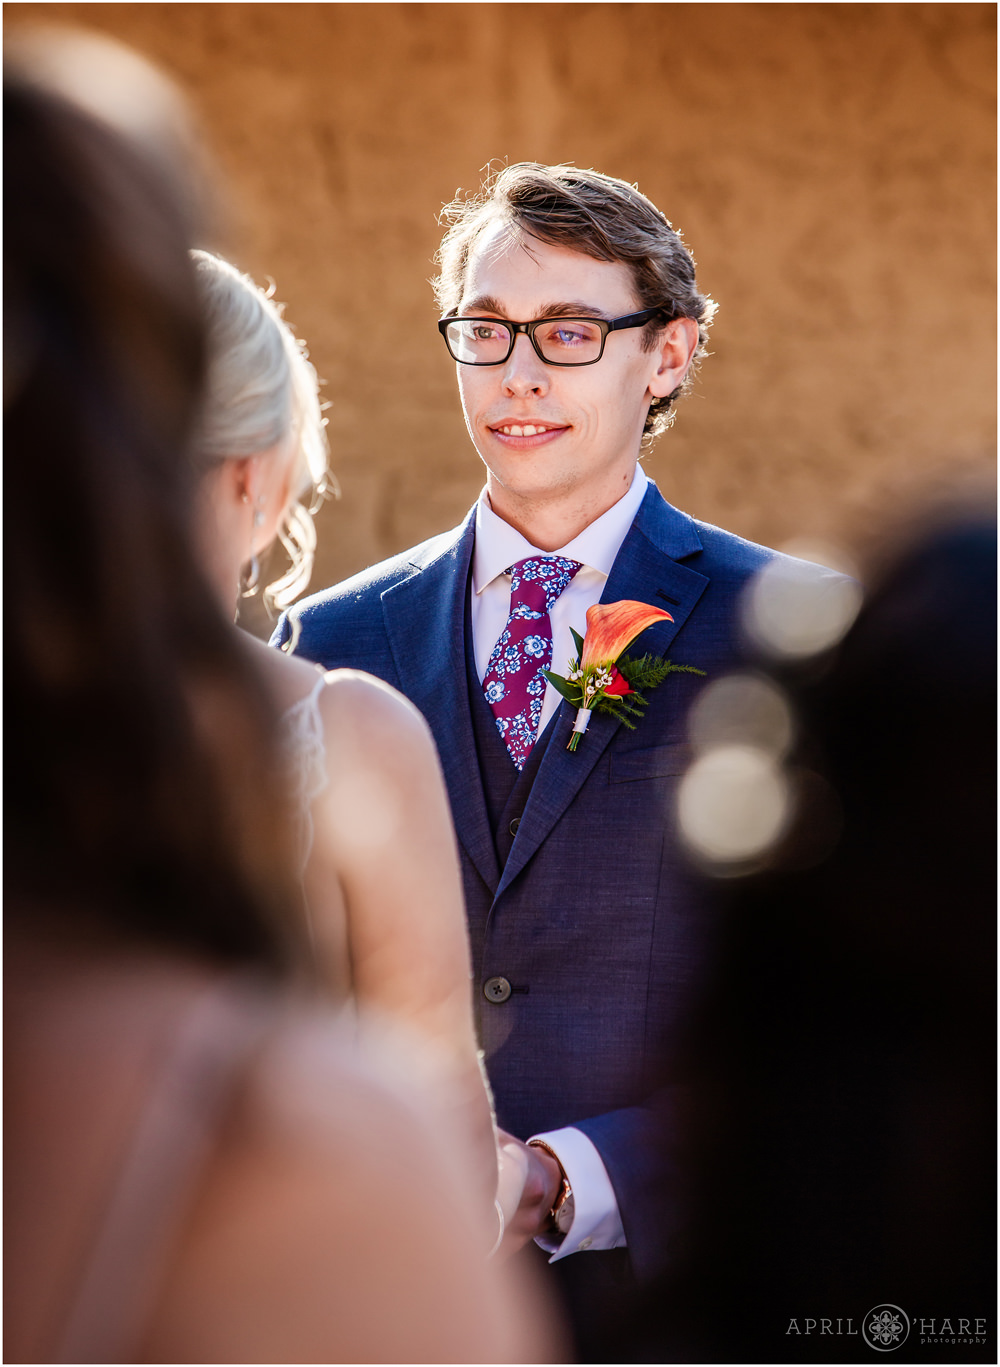 Groom wearing glasses in a blue suit with orange boutonniere at outdoor wedding ceremony in Courtyard at Villa Parker in Colorado